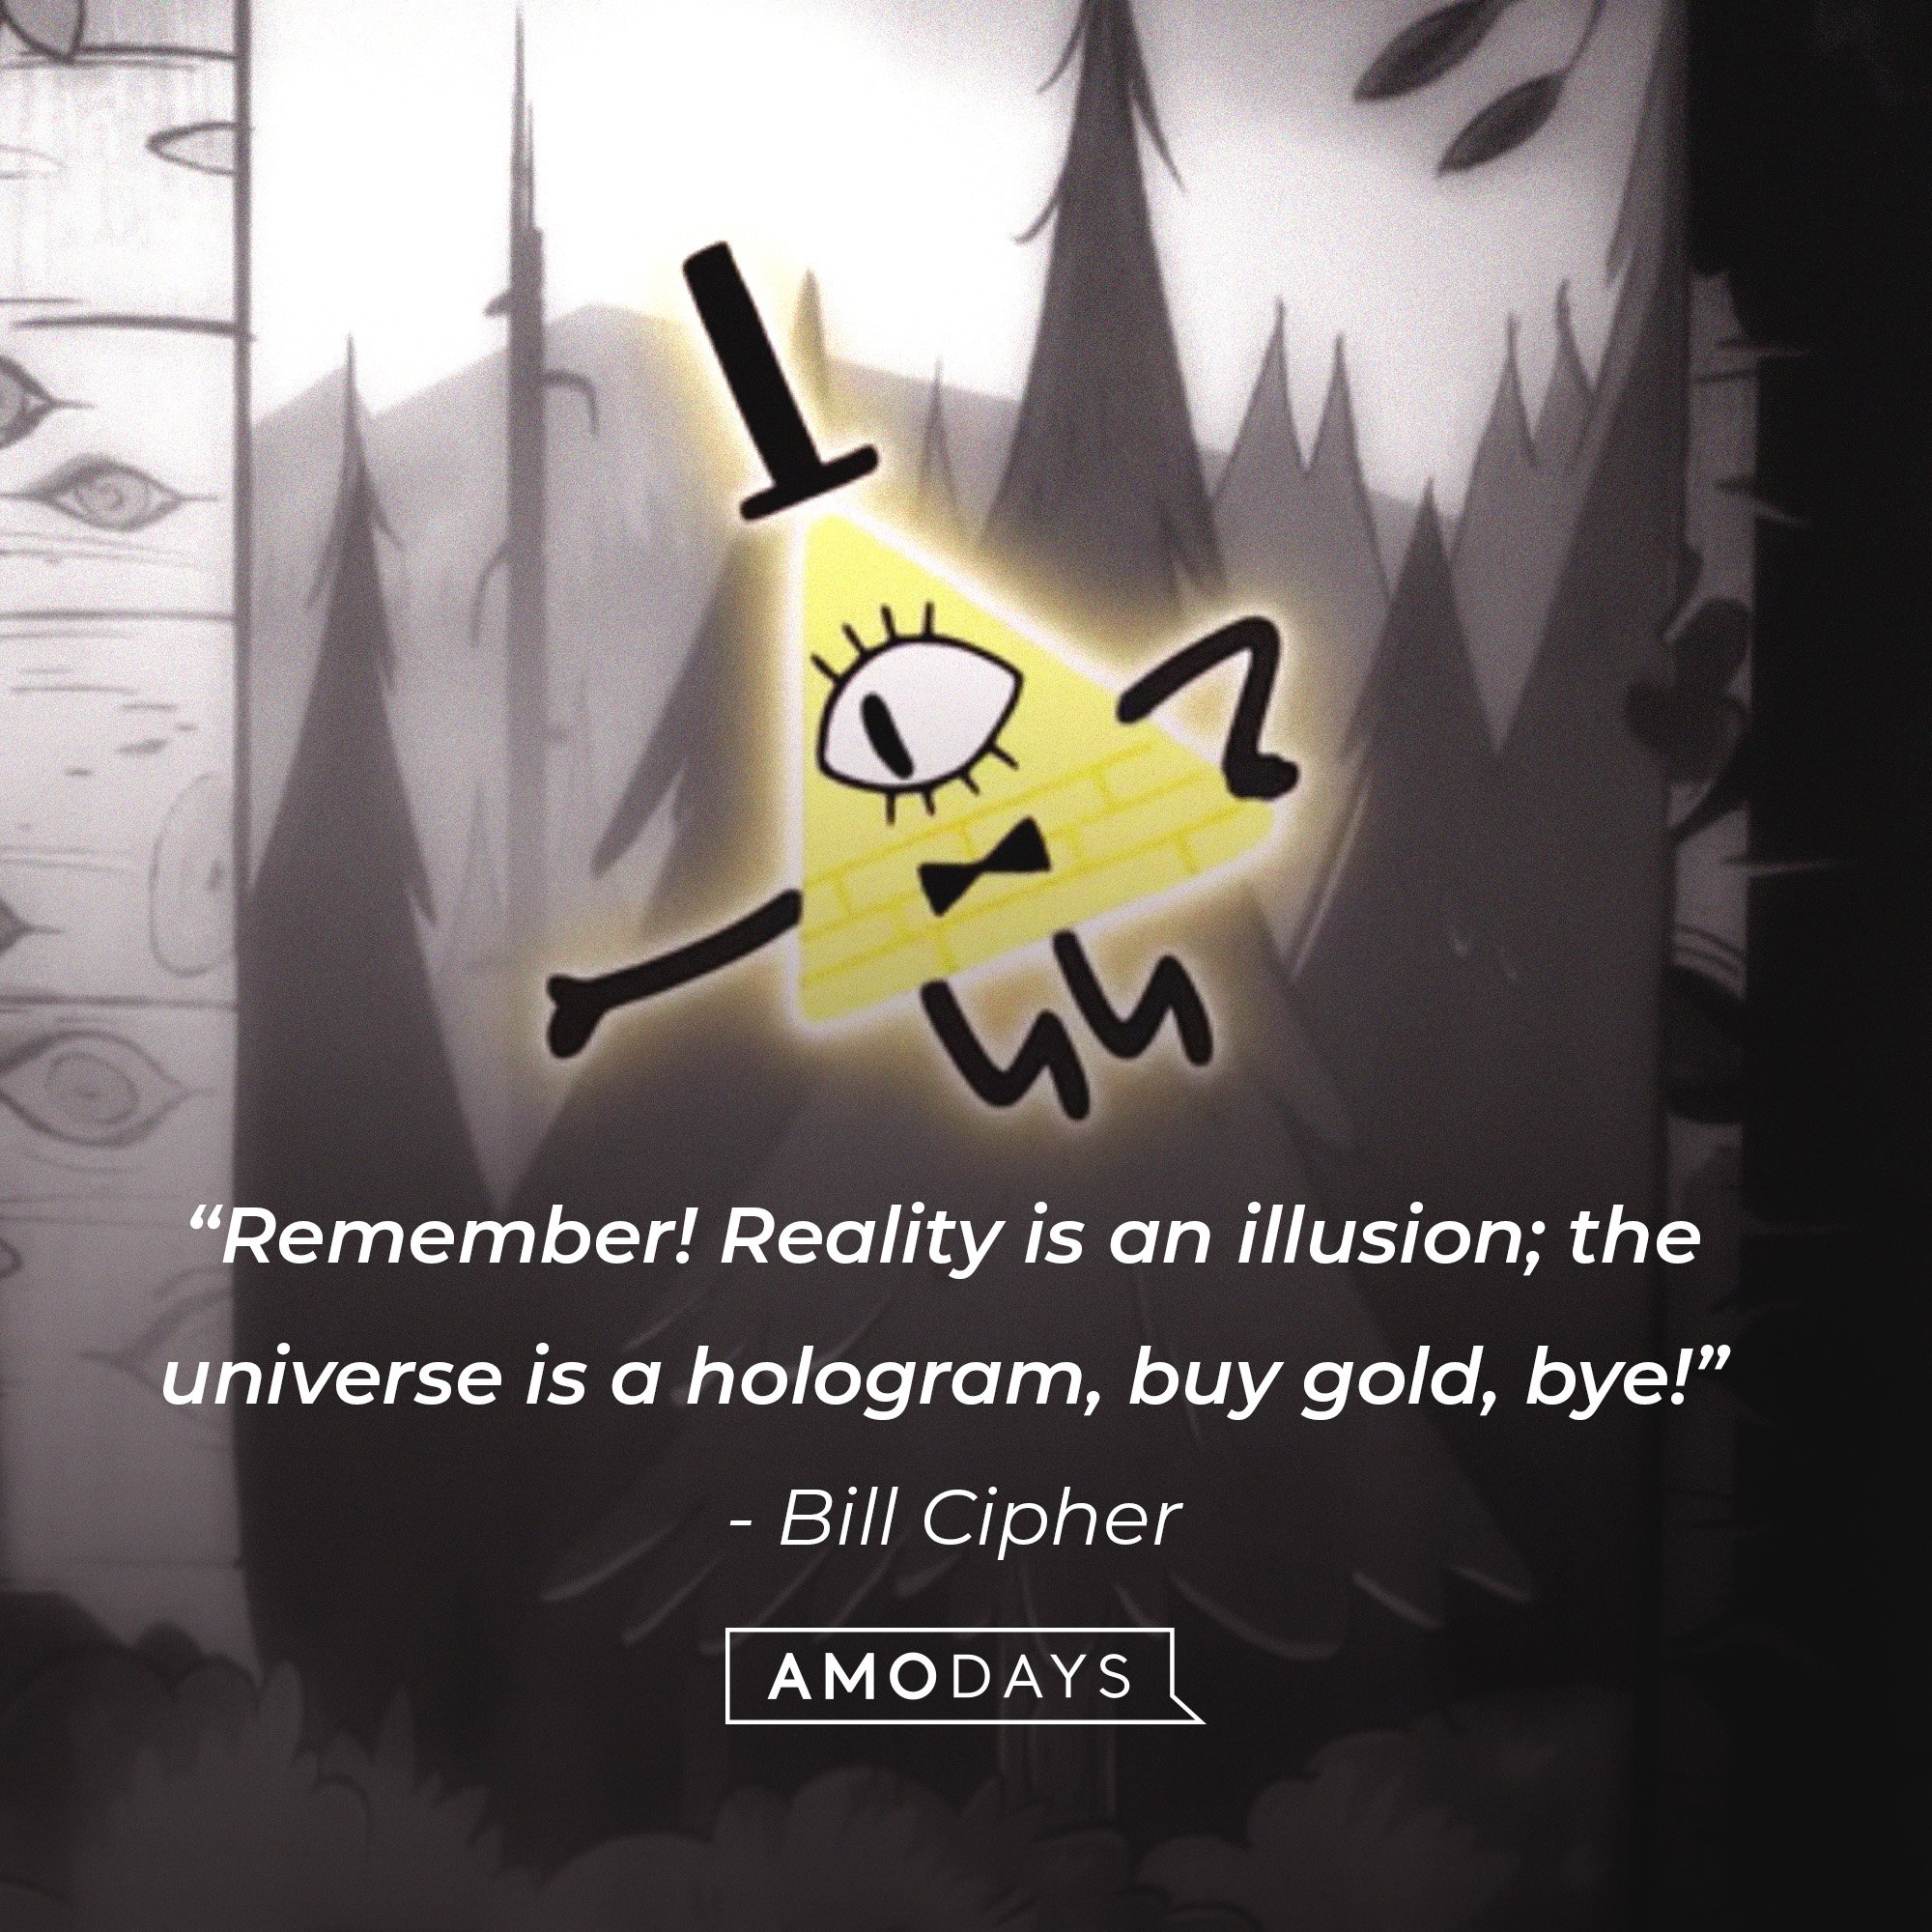 Bill Cipher’s quote: “Remember! Reality is an illusion; the universe is a hologram, buy gold, bye!” | Image: AmoDays